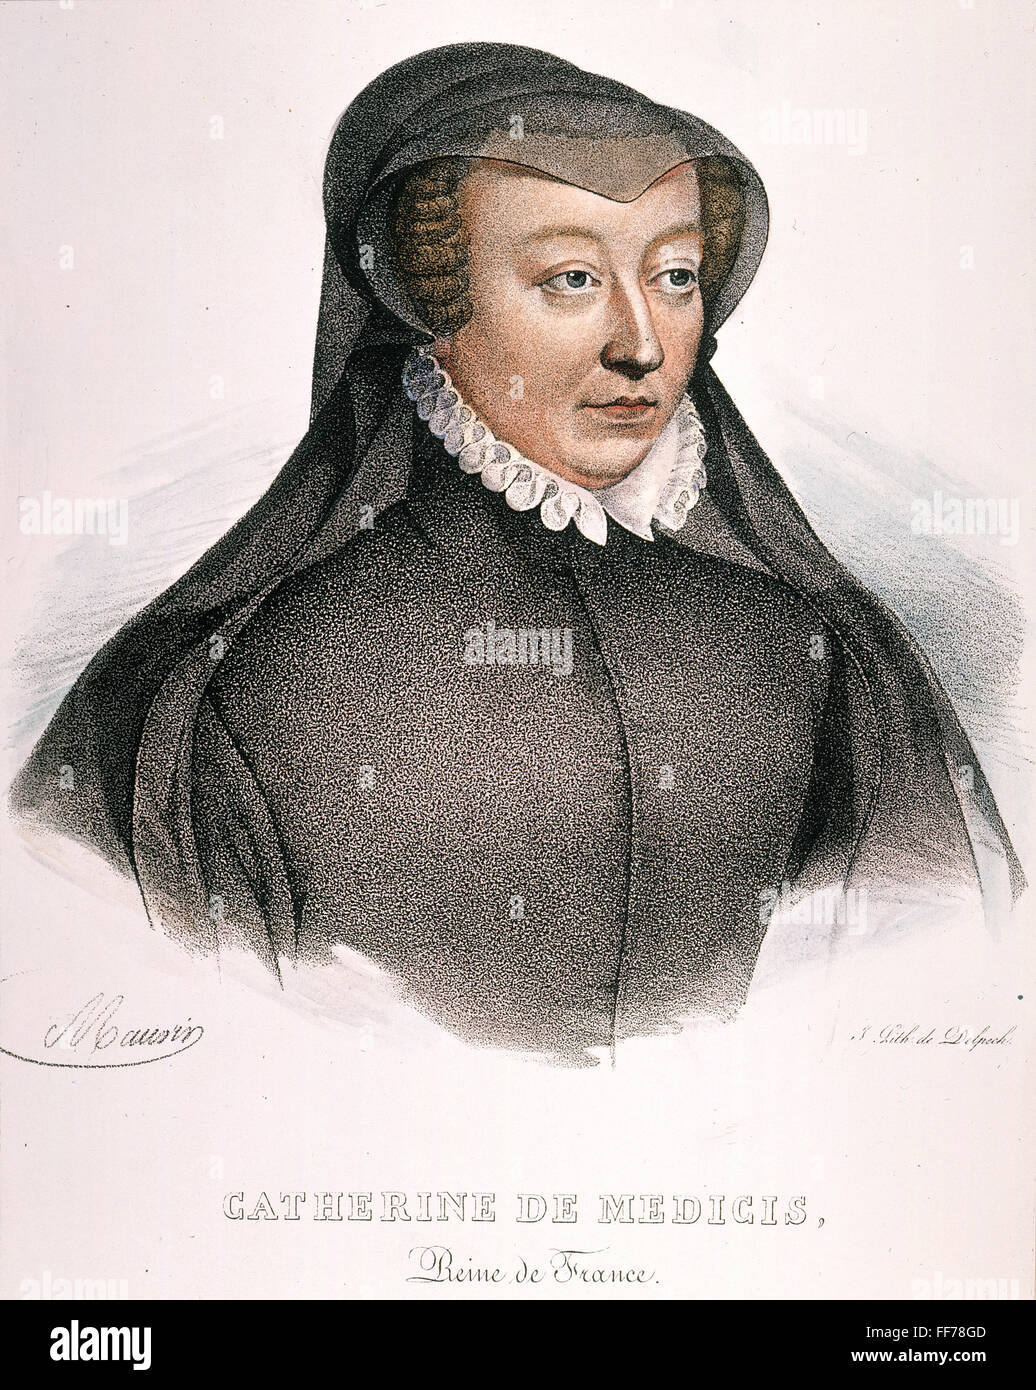 CATHERINE DE MEDICIS /n(1519-1589). Queen of France, 1547-1559. French lithograph, 19th century. Stock Photo